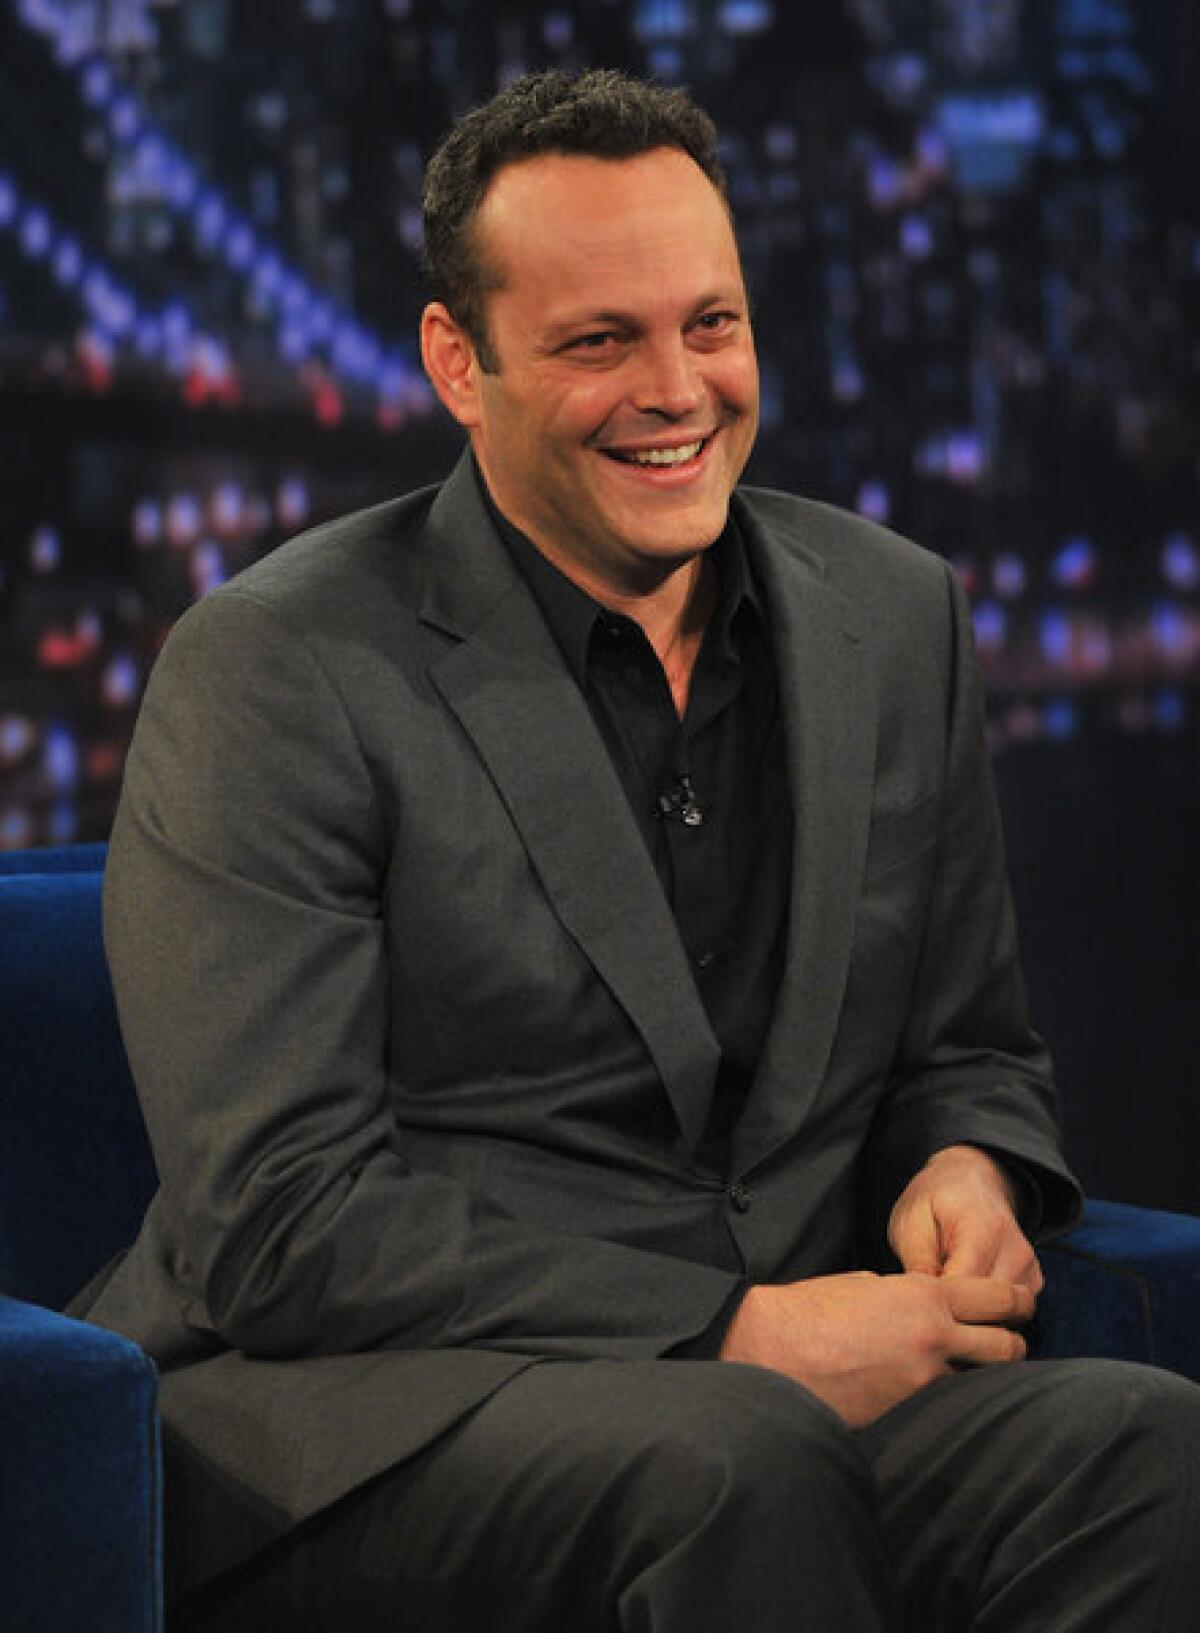 Vince Vaughn visits "Late Night With Jimmy Fallon."